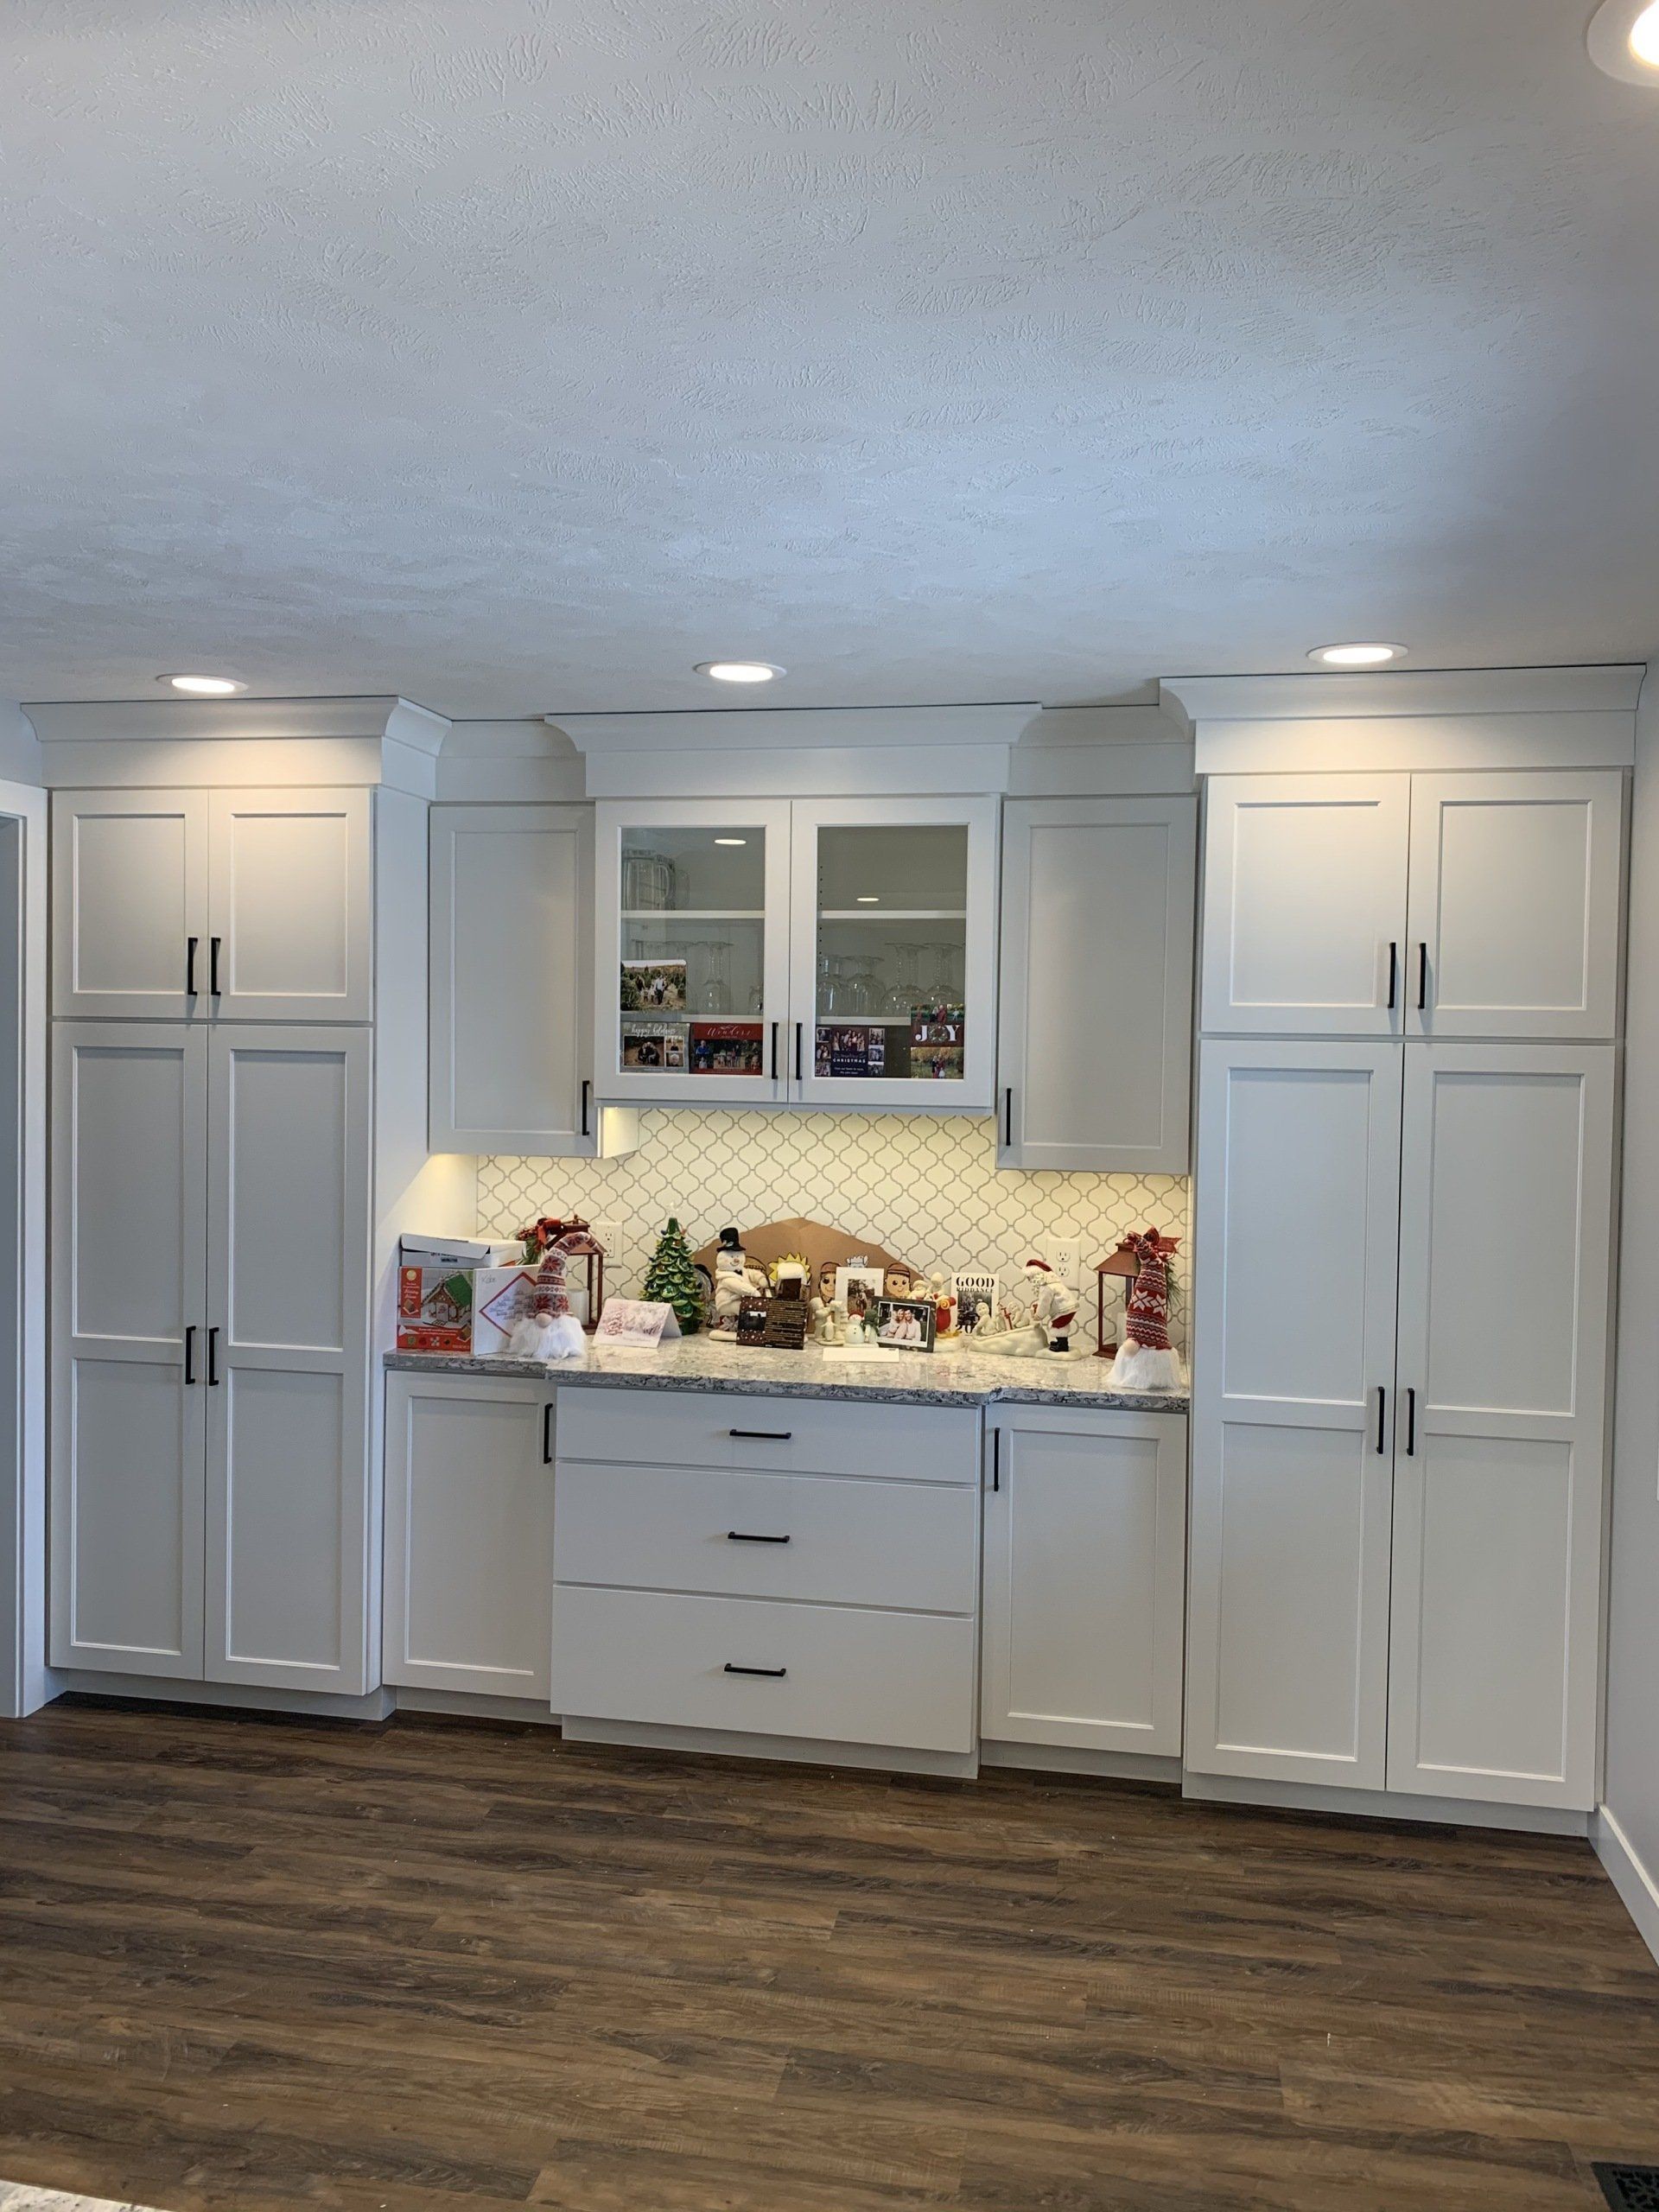 kitchen remodel - cabinets